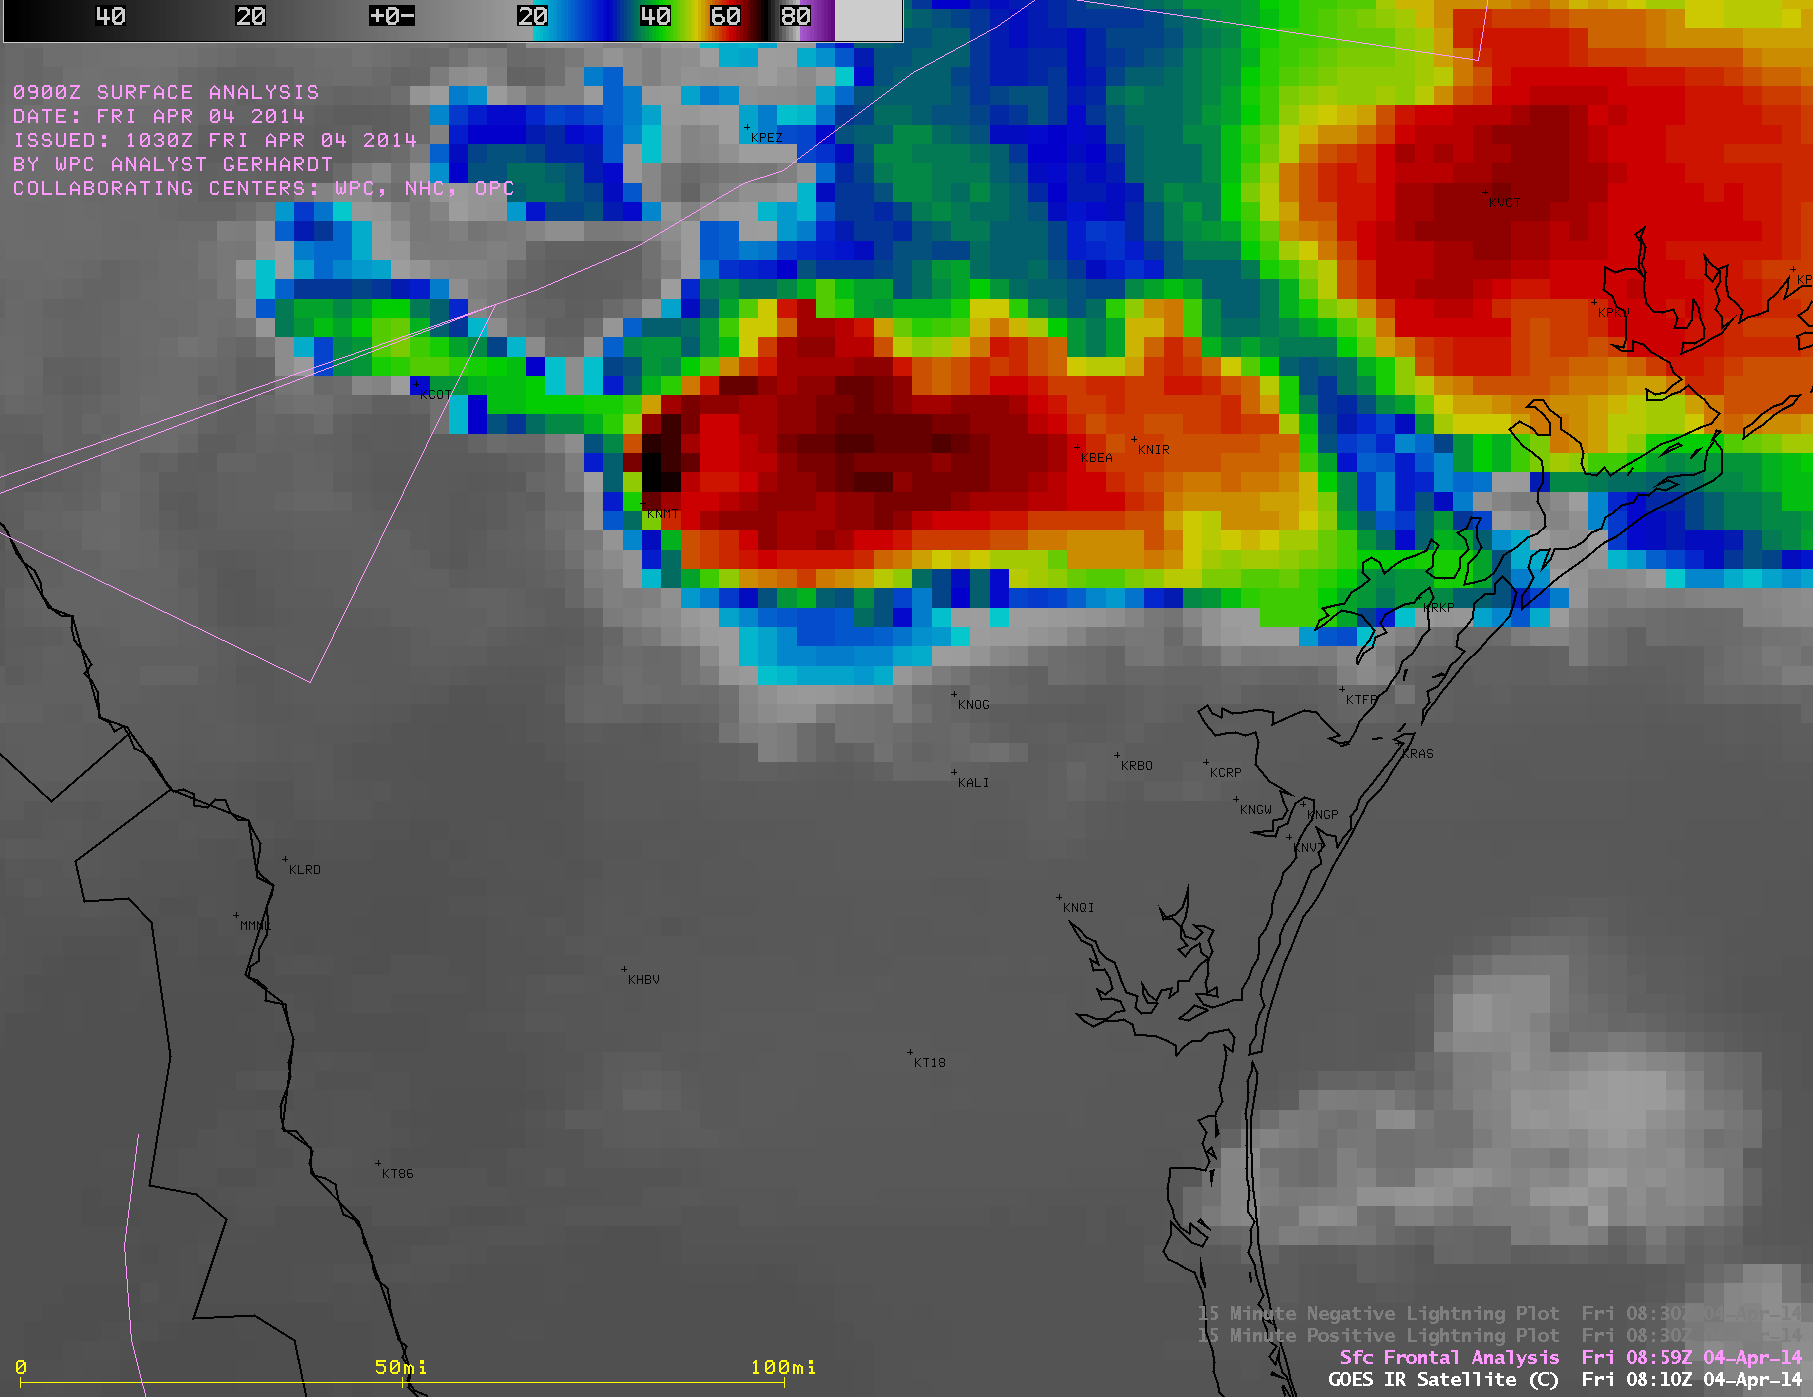 GOES-13 10.7 Âµm IR channel images (click to play animation)